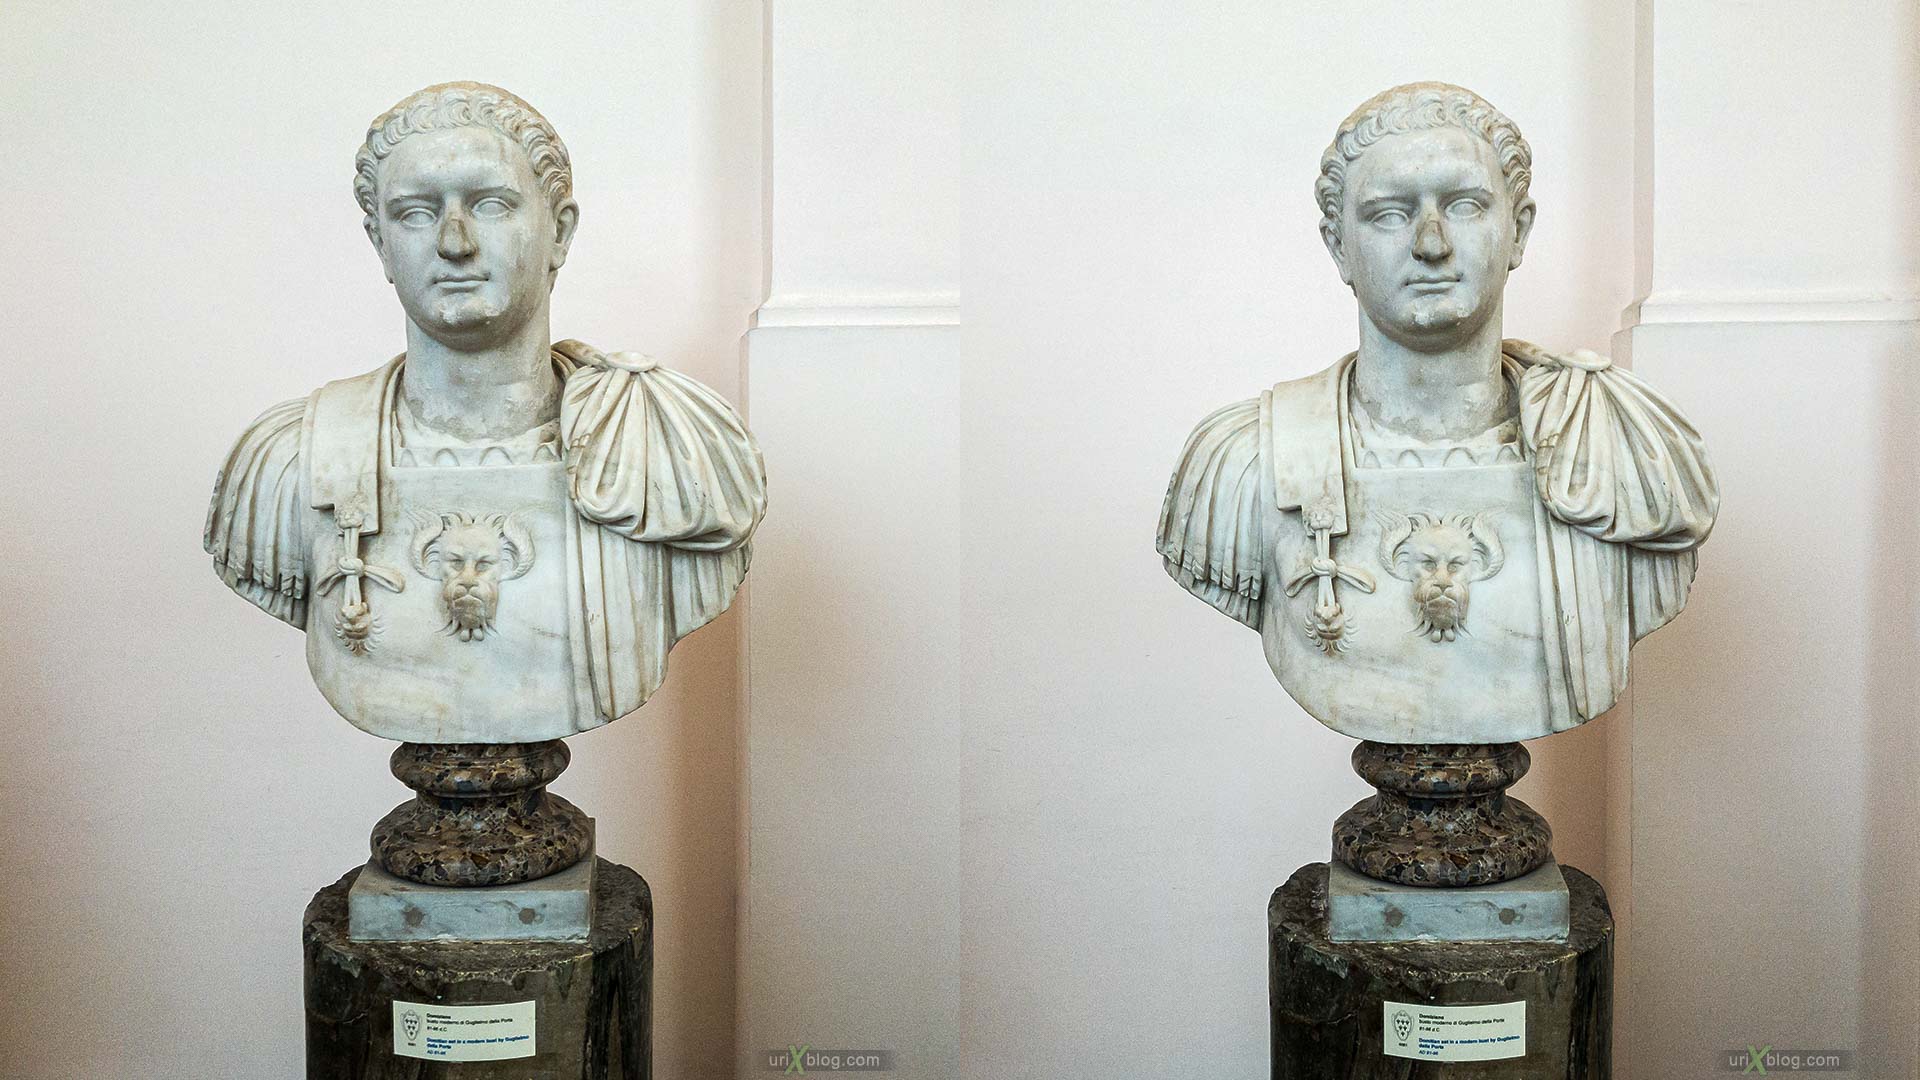 statue, National Archaeological Museum of Naples, ancient Rome, Pompei, exhibition, Naples, Italy, 3D, stereo pair, cross-eyed, crossview, cross view stereo pair, stereoscopic